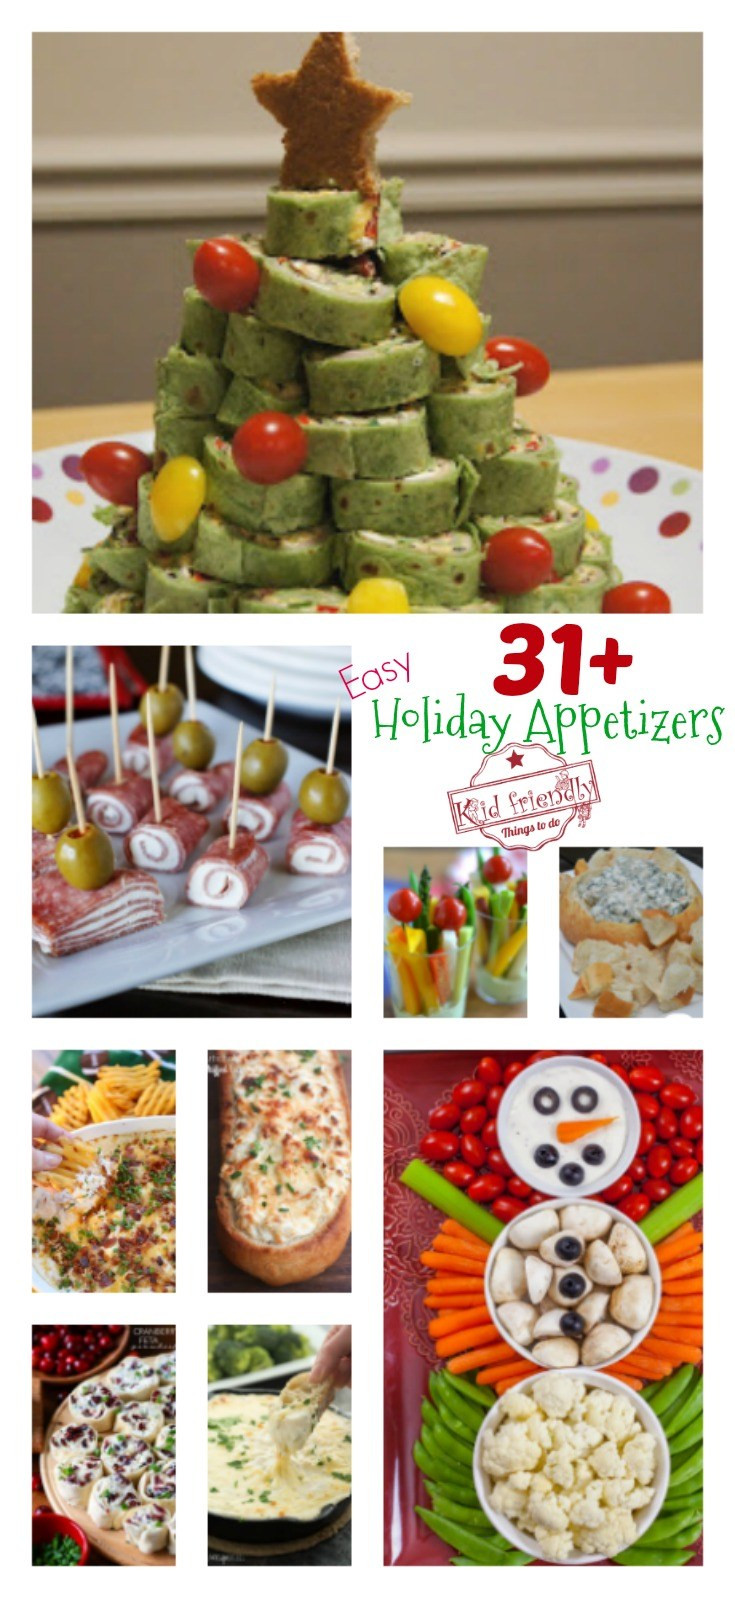 Easy Christmas Eve Appetizers
 Over 31 Easy Holiday Appetizers to Make for Christmas New